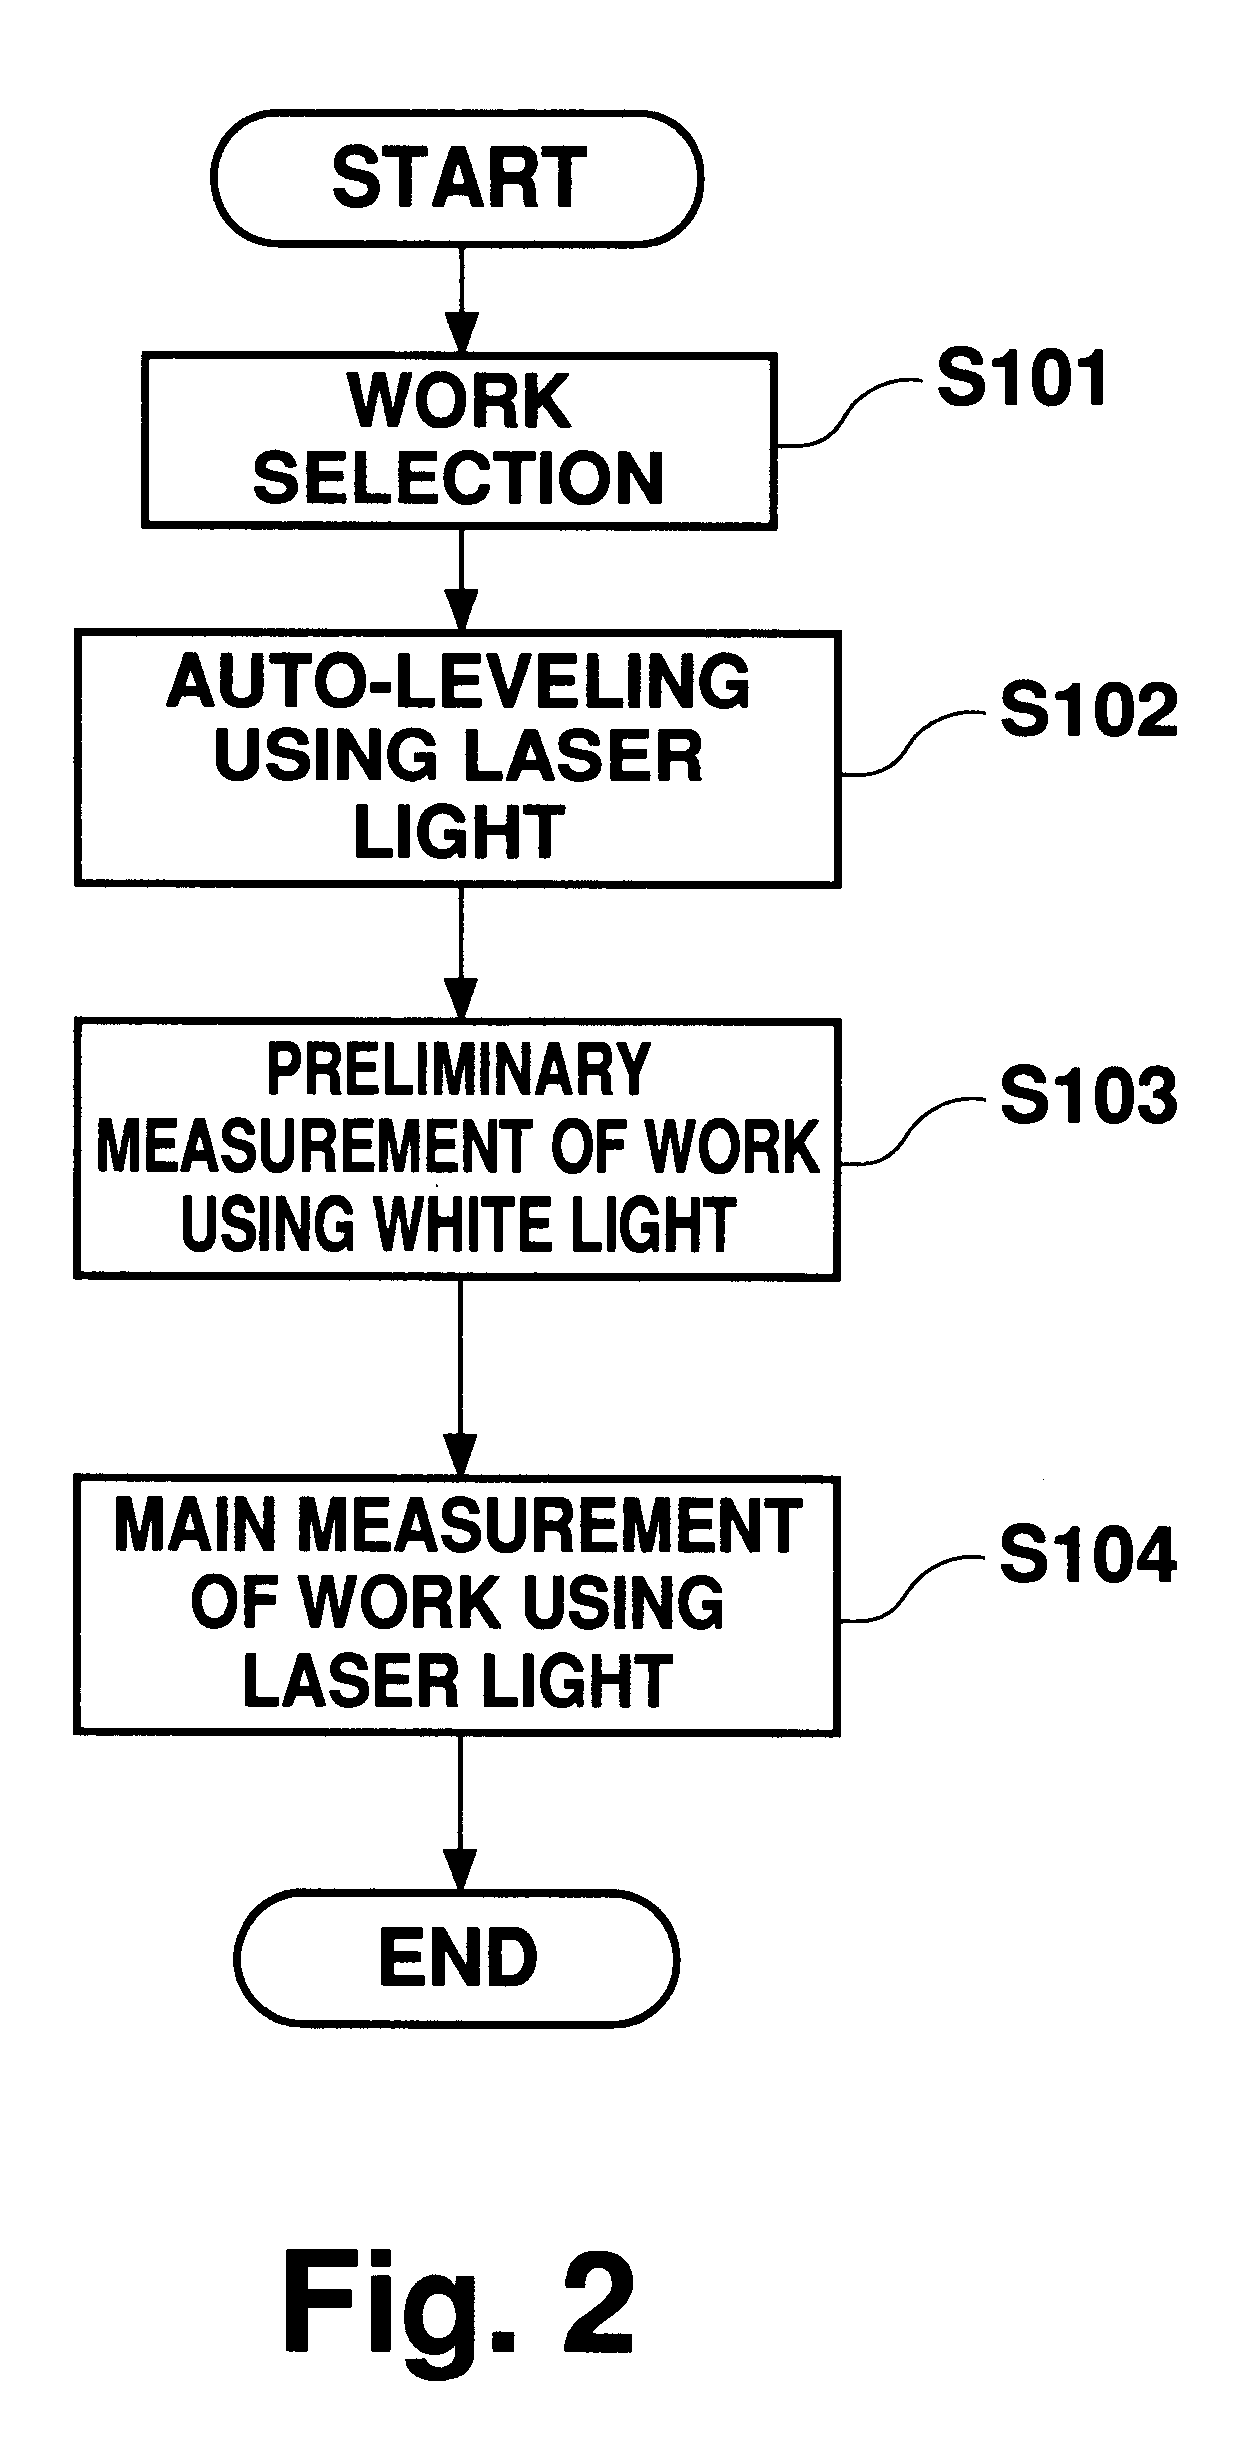 Dimension measurement using both coherent and white light interferometers